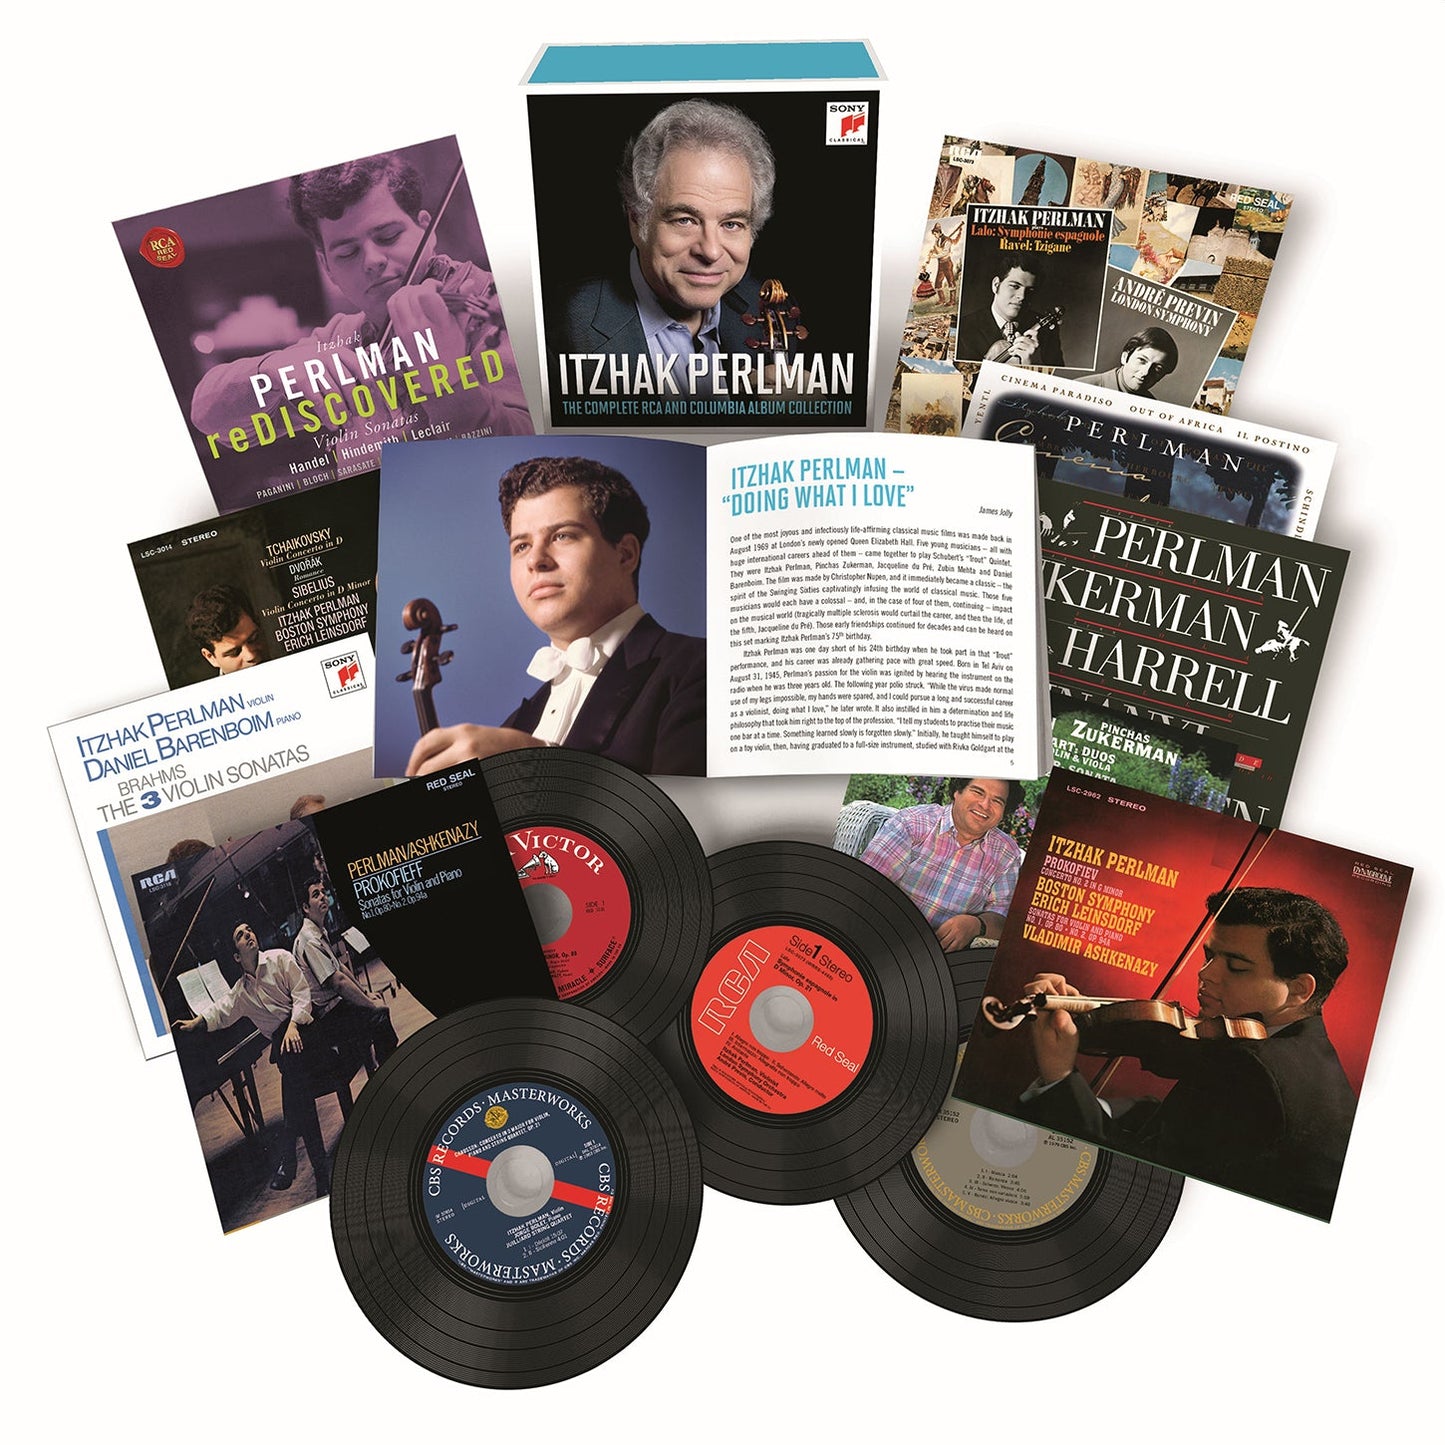 Itzhak Perlman - The Complete RCA and Columbia Album Collection [18 CDs]